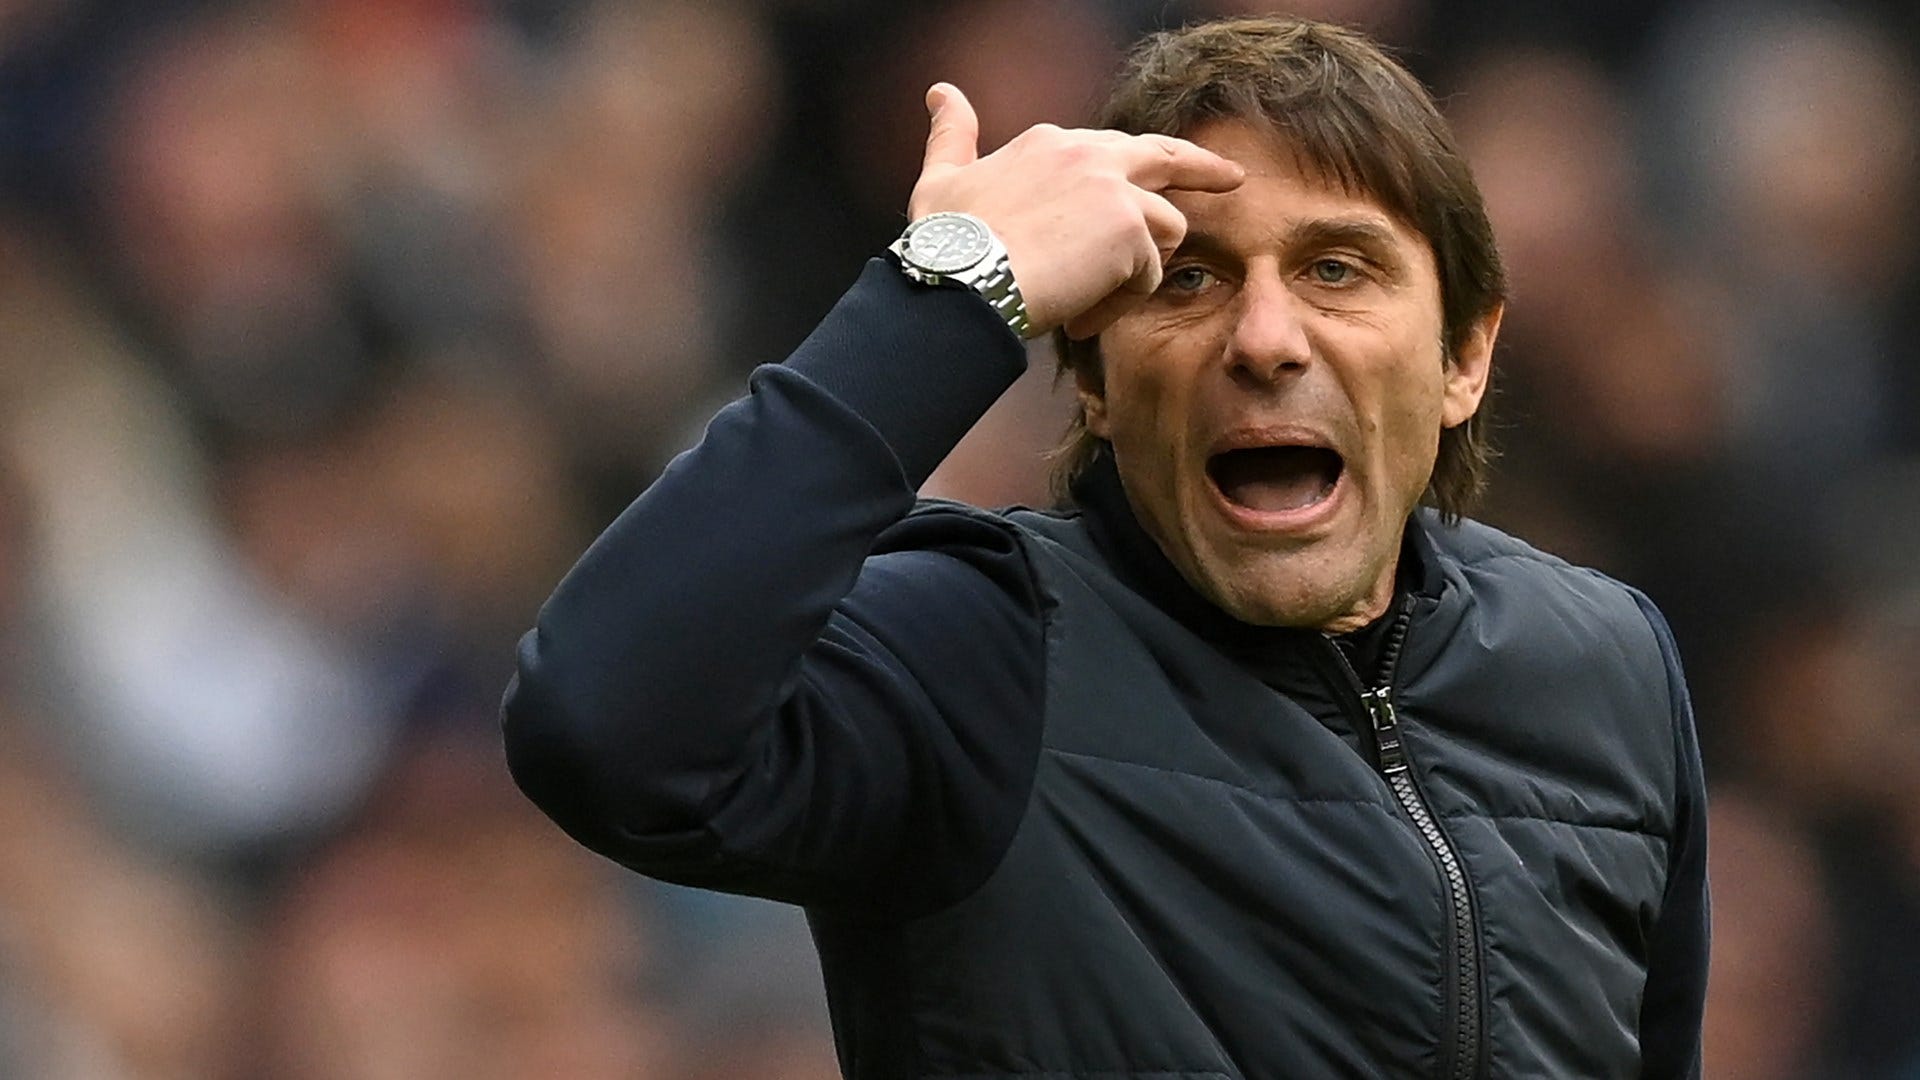 'Antonio Conte clashes with everyone!' - Sacked Spurs manager's 'severe' character 'leaves you sleepless', says Christian Vieri